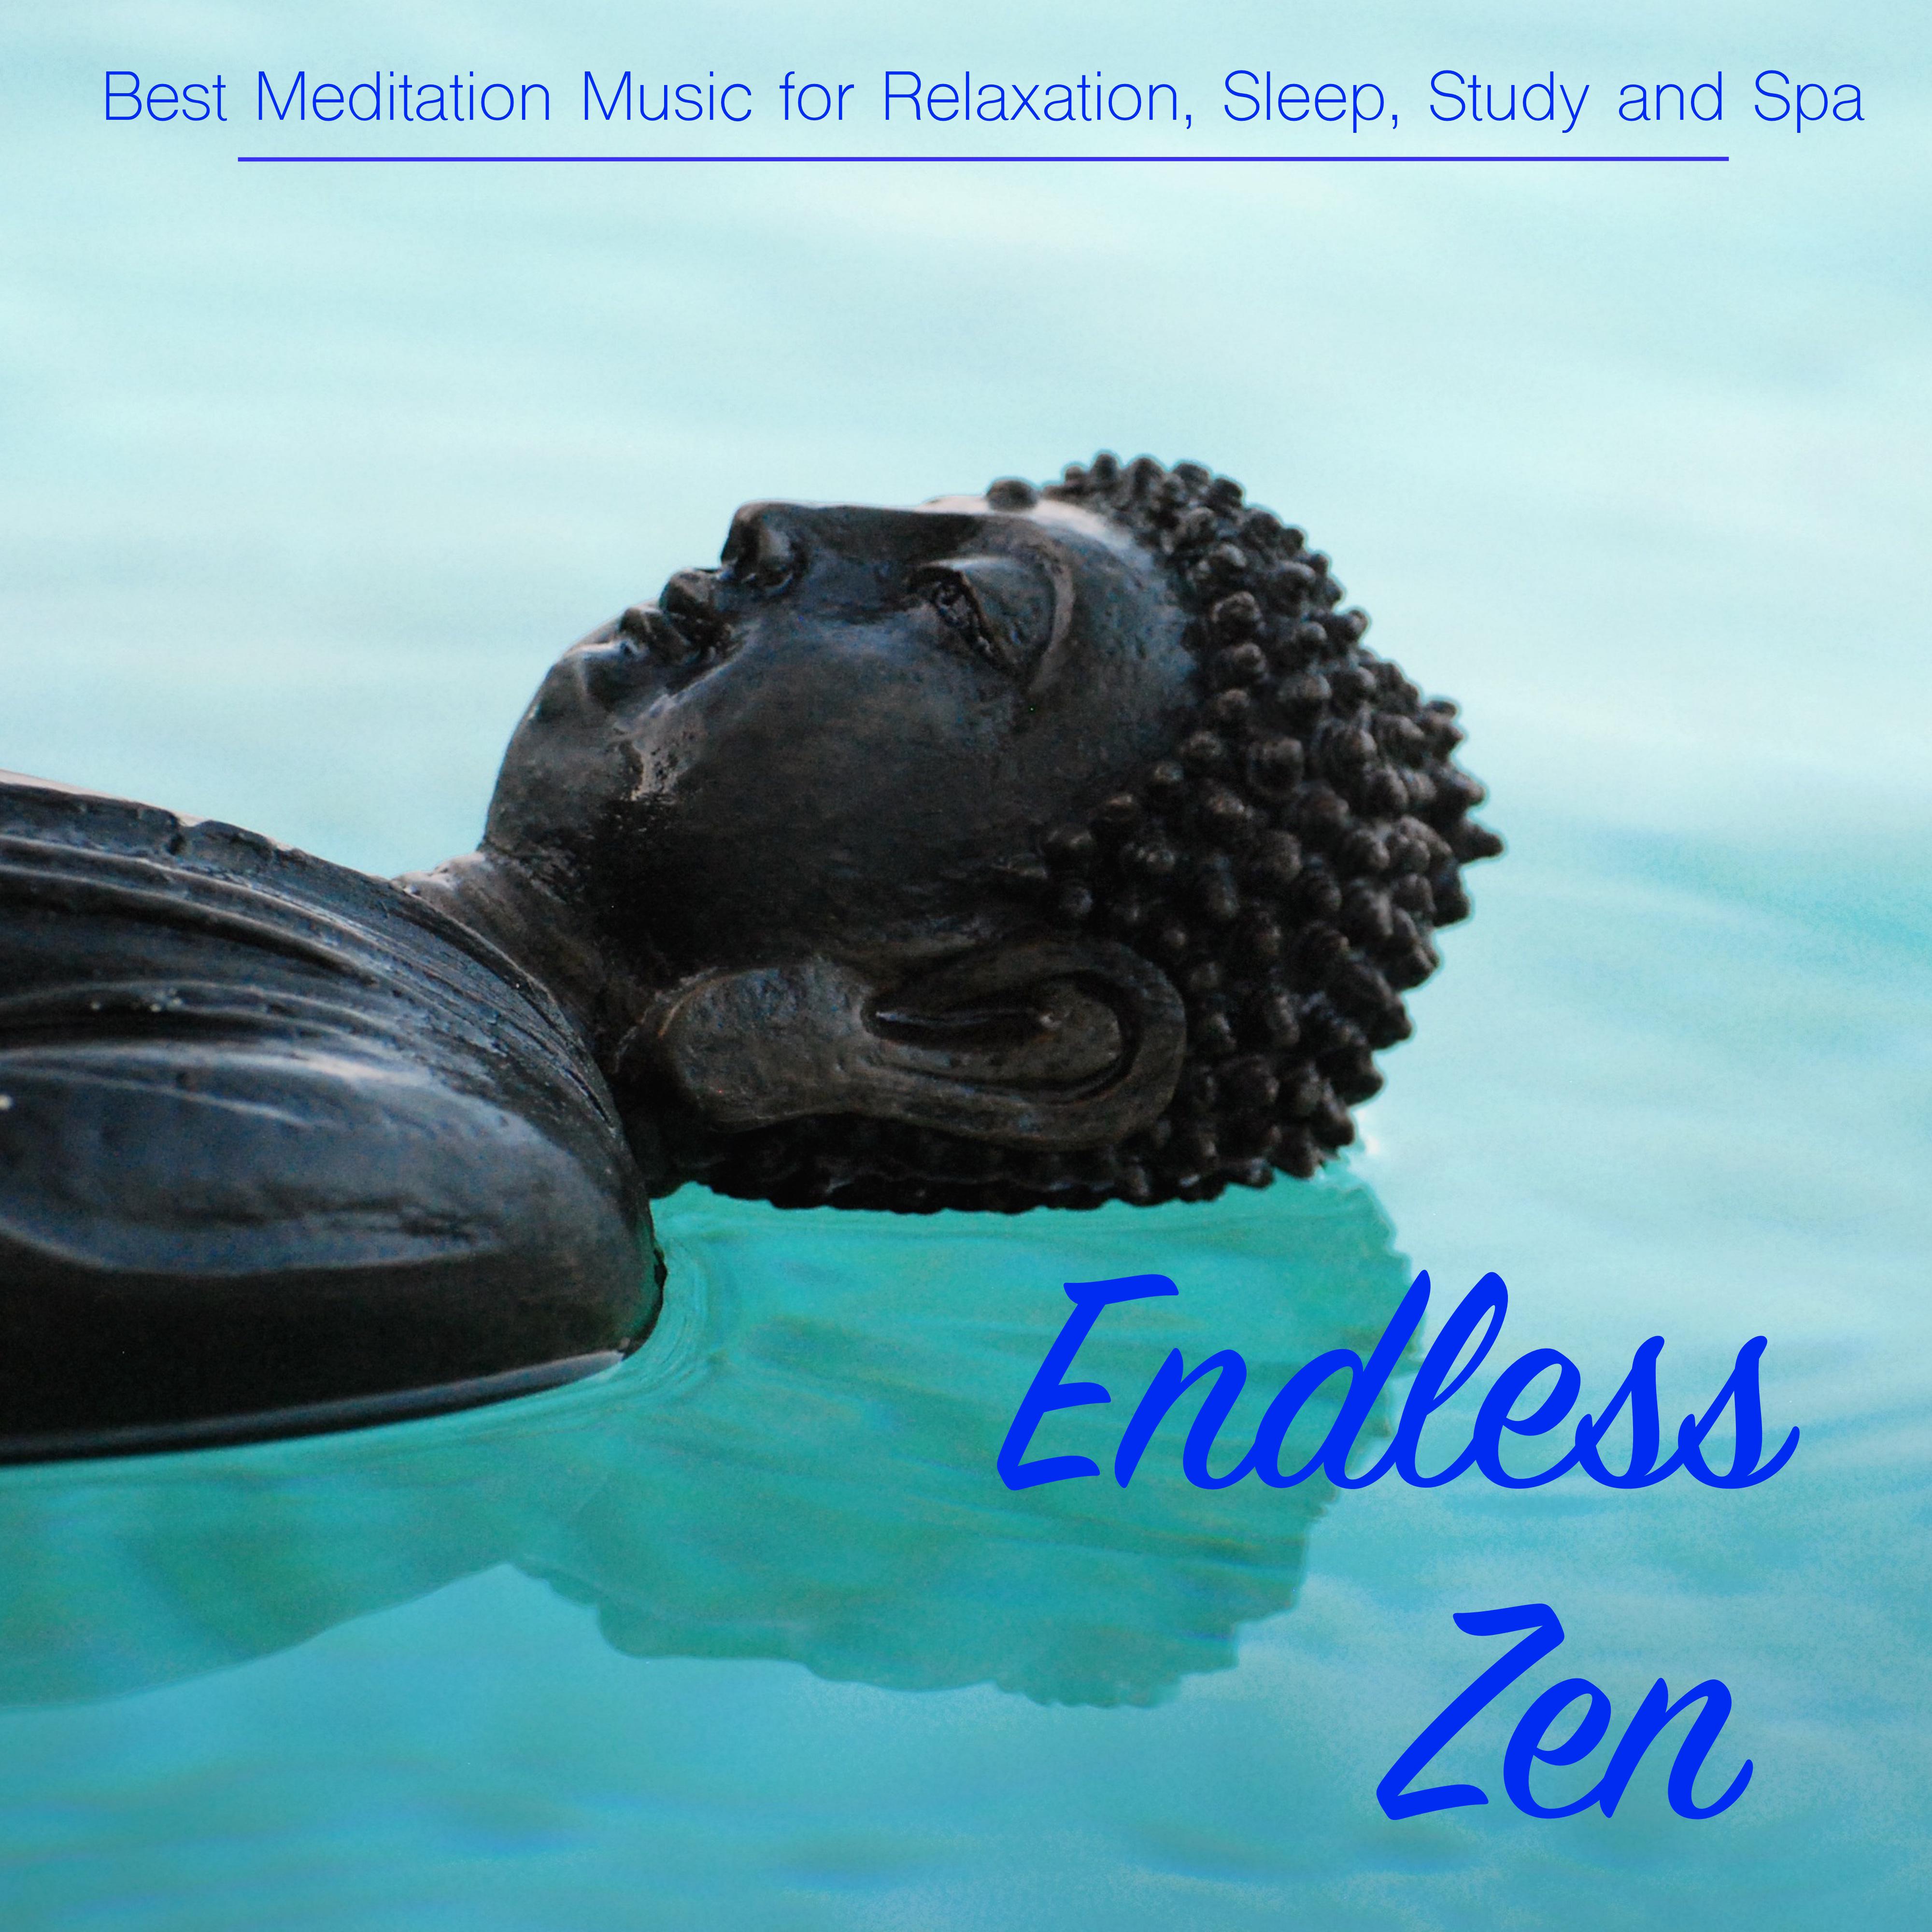 Endless Zen - Best Meditation Music for Relaxation, Sleep, Study and Spa